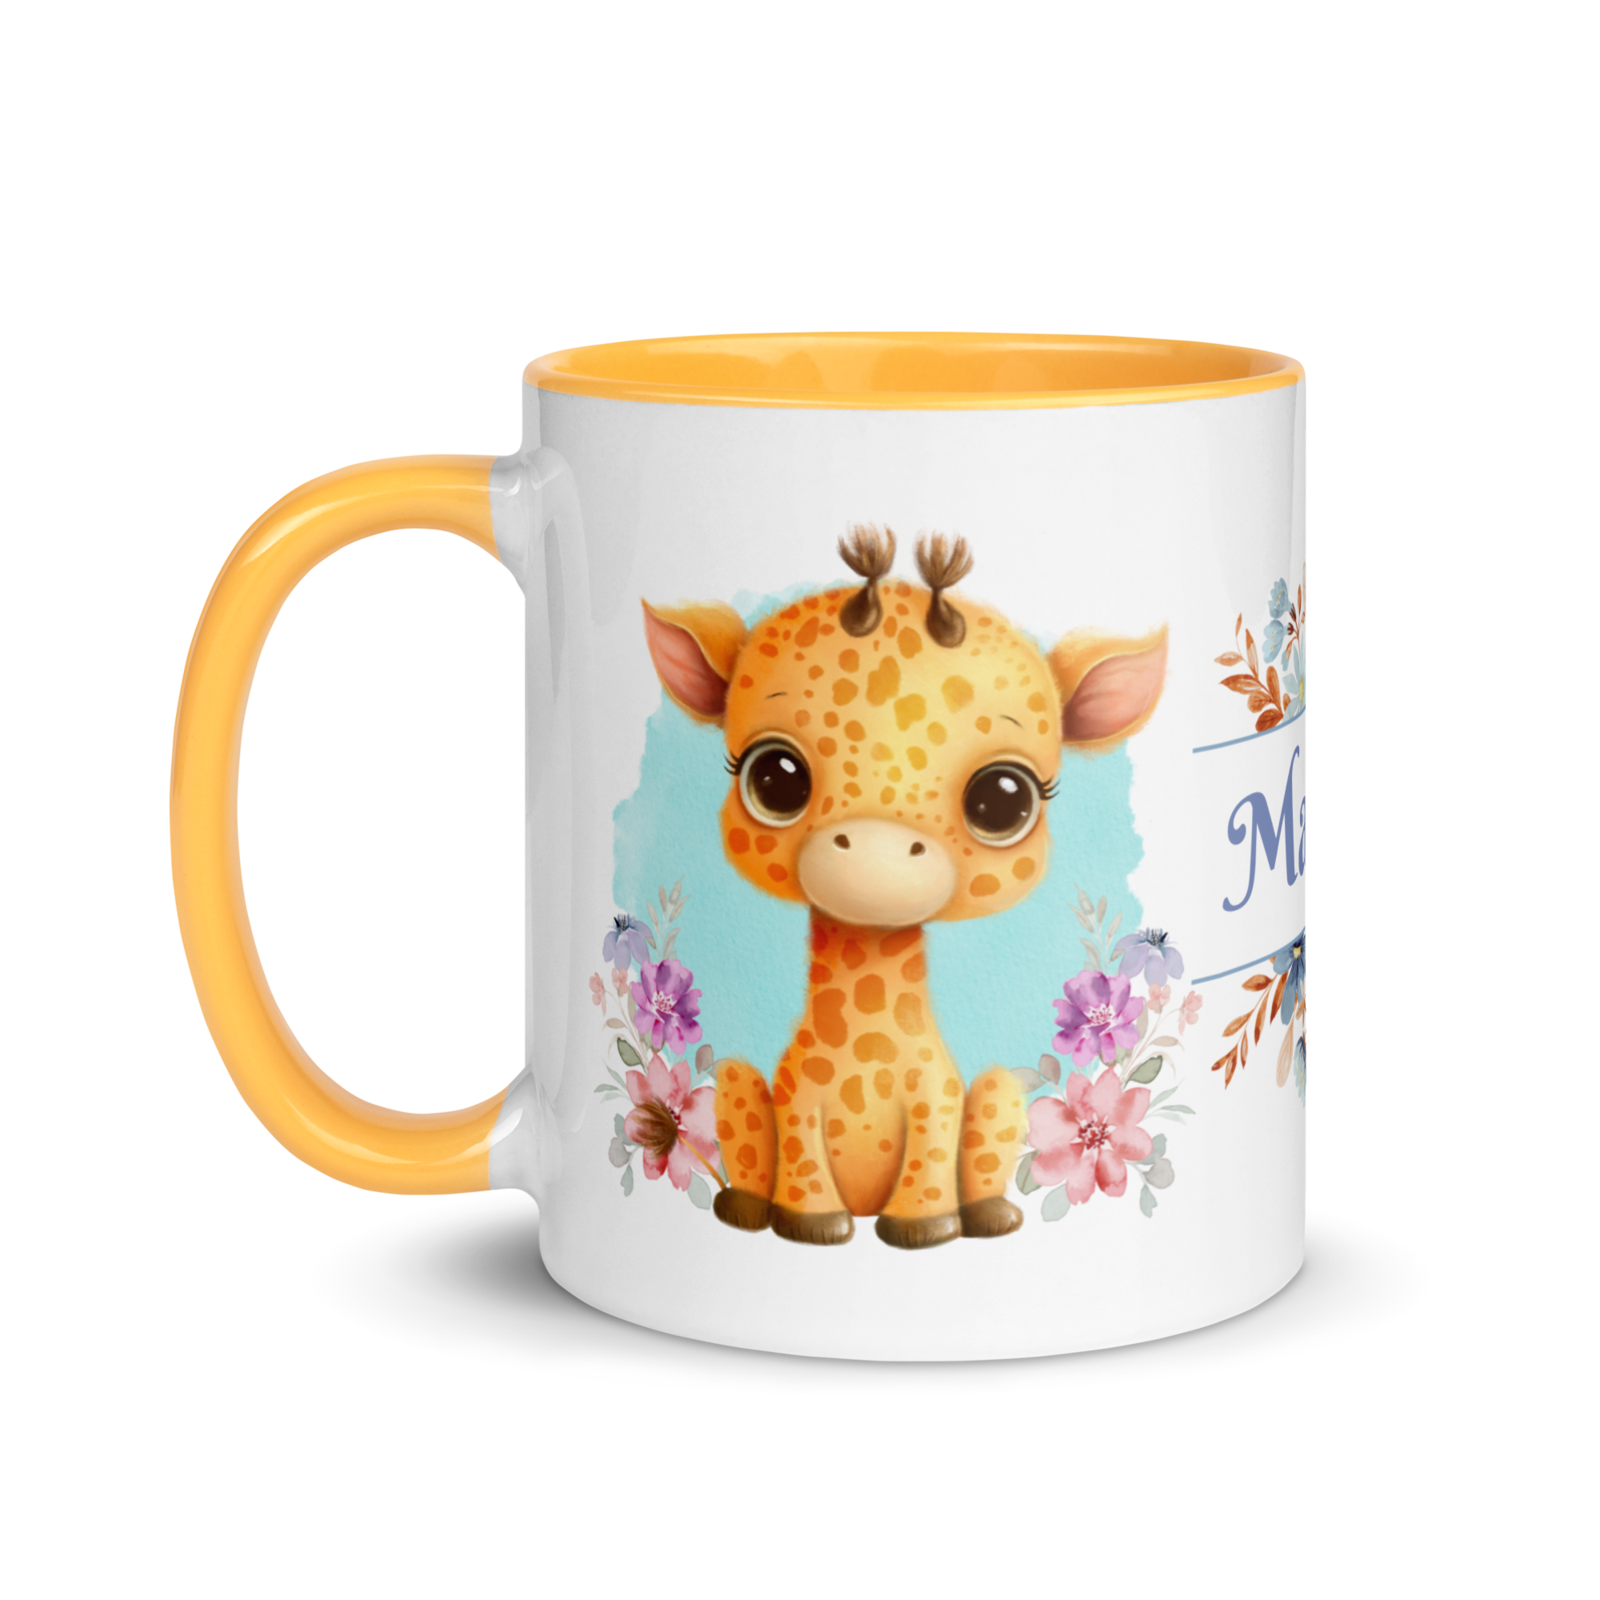 Primary image for Personalized Coffee Mug 11oz | Add Your Name to Cute Giraffe Floral Themed